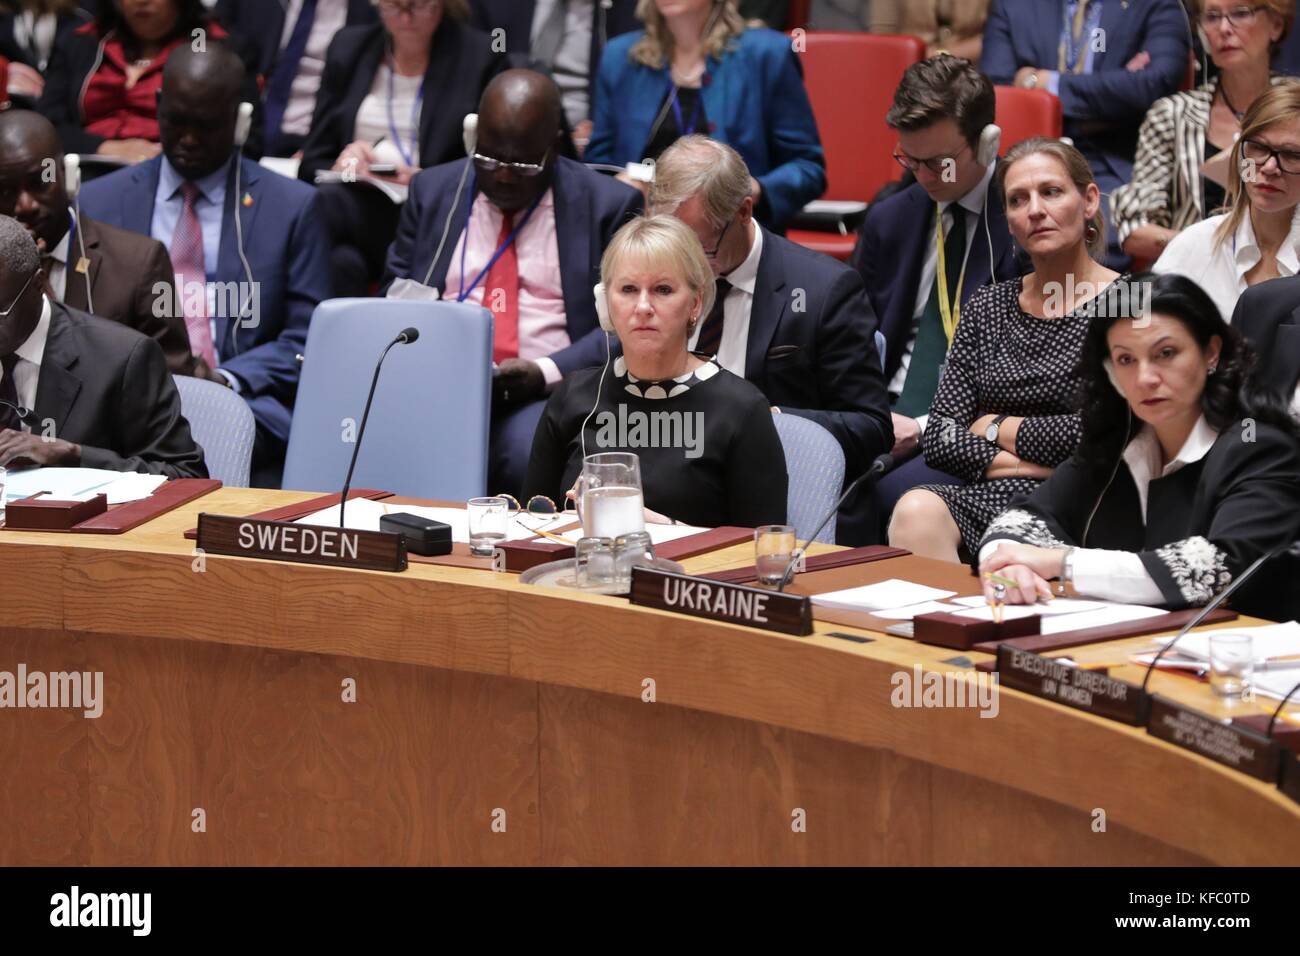 United Nations, New York, USA, October27 2017 - Minister for Foreign Affairs Margot Wallstrom During the Security Council Open debate on women, peace and security today at the UN Headquarters in New York. Photo: Luiz Rampelotto/EuropaNewswire | usage worldwide Stock Photo